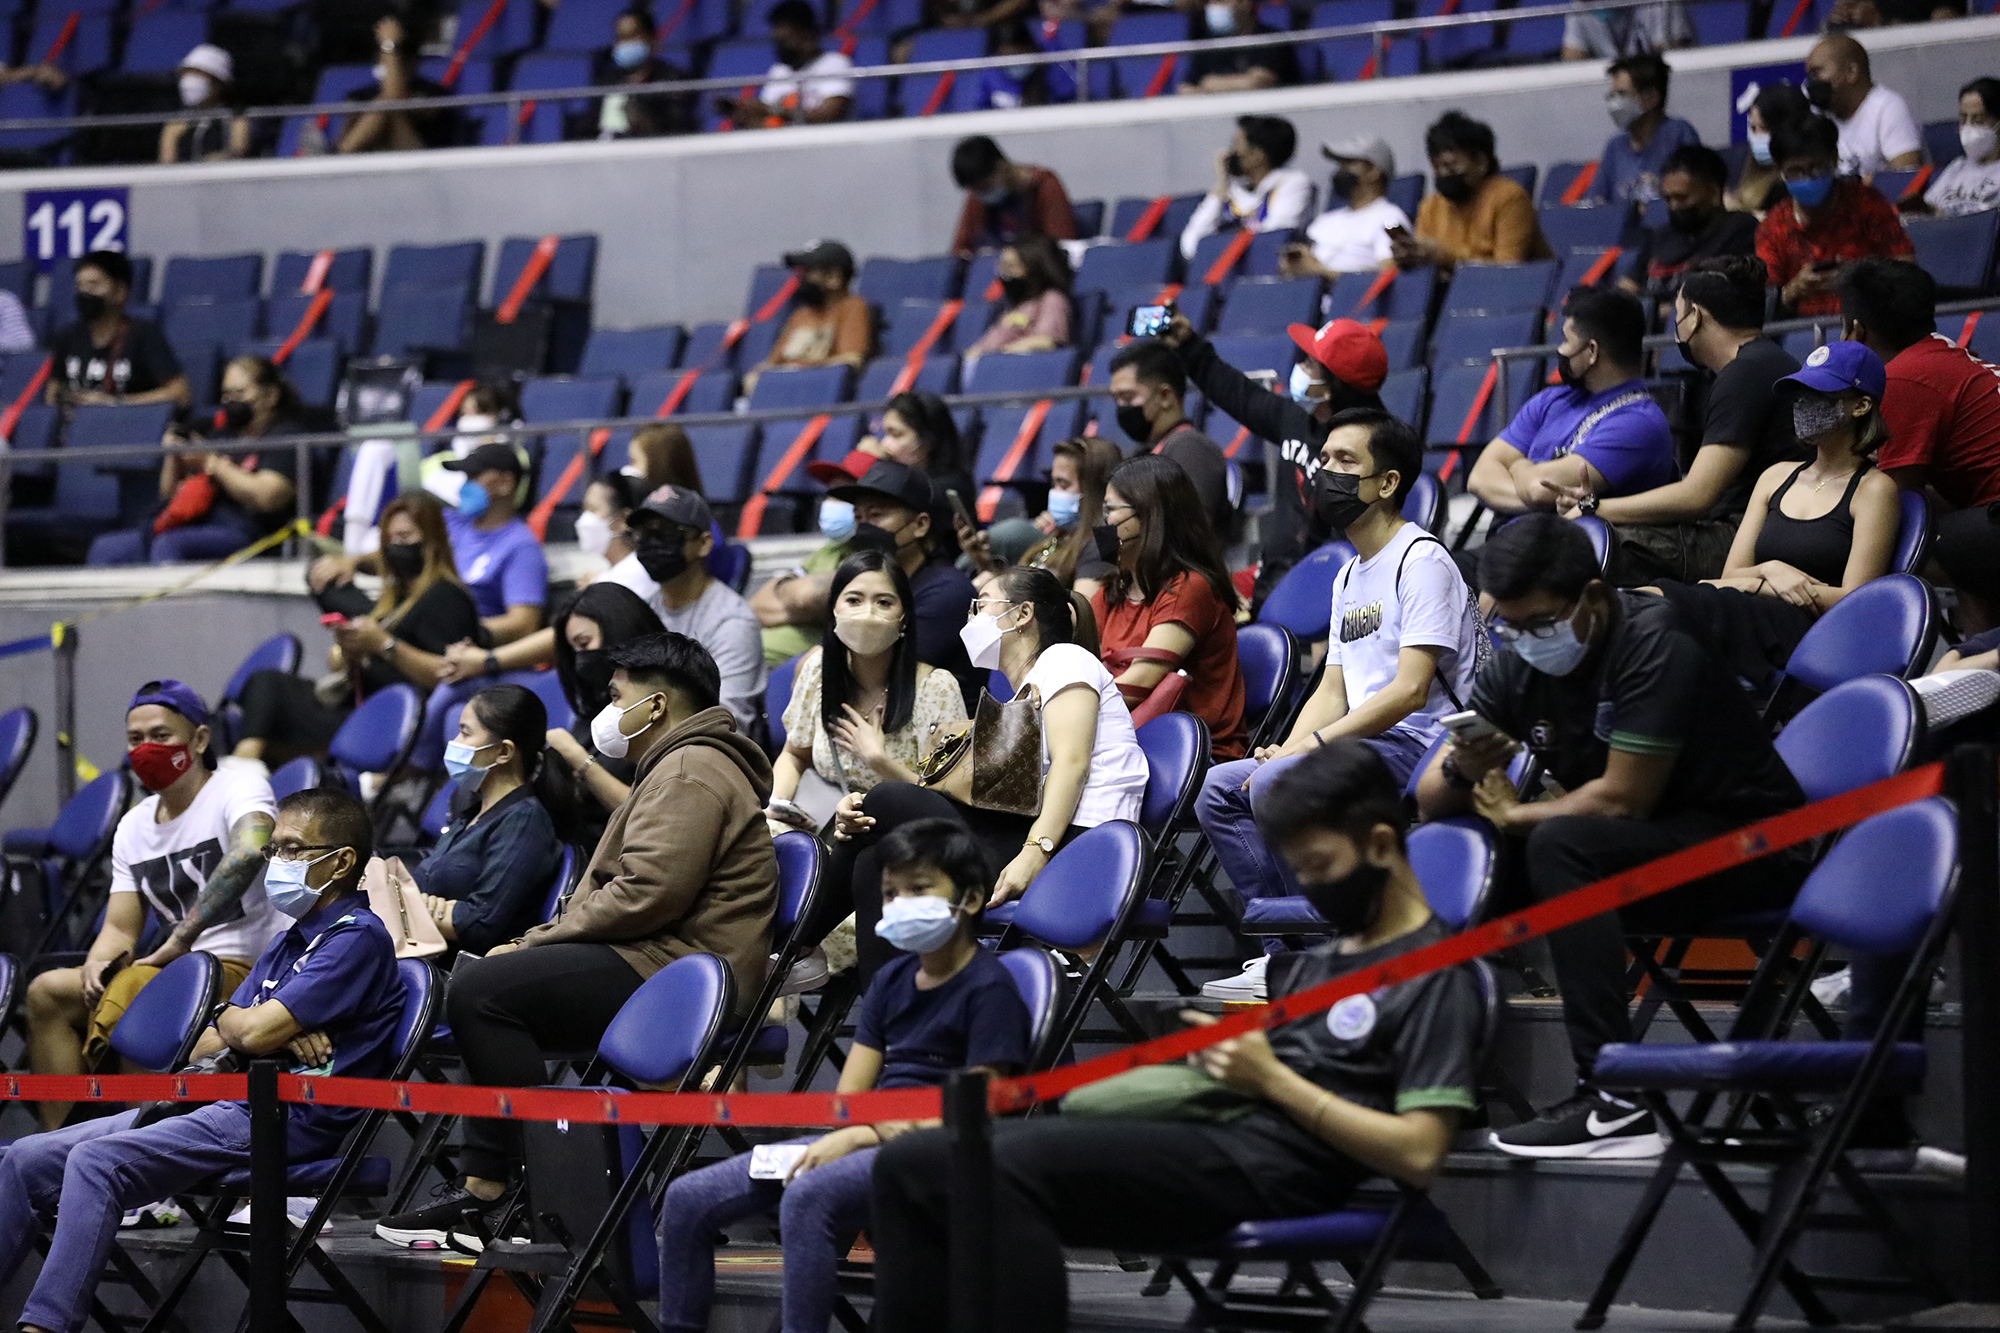 Fans nearly fill out the allowed seating areas at the Big Dome, a welcome surprise for the league that was expecting a much lower Wednesday turnout. —PHOTOS COURTESY OF PBA IMAGES